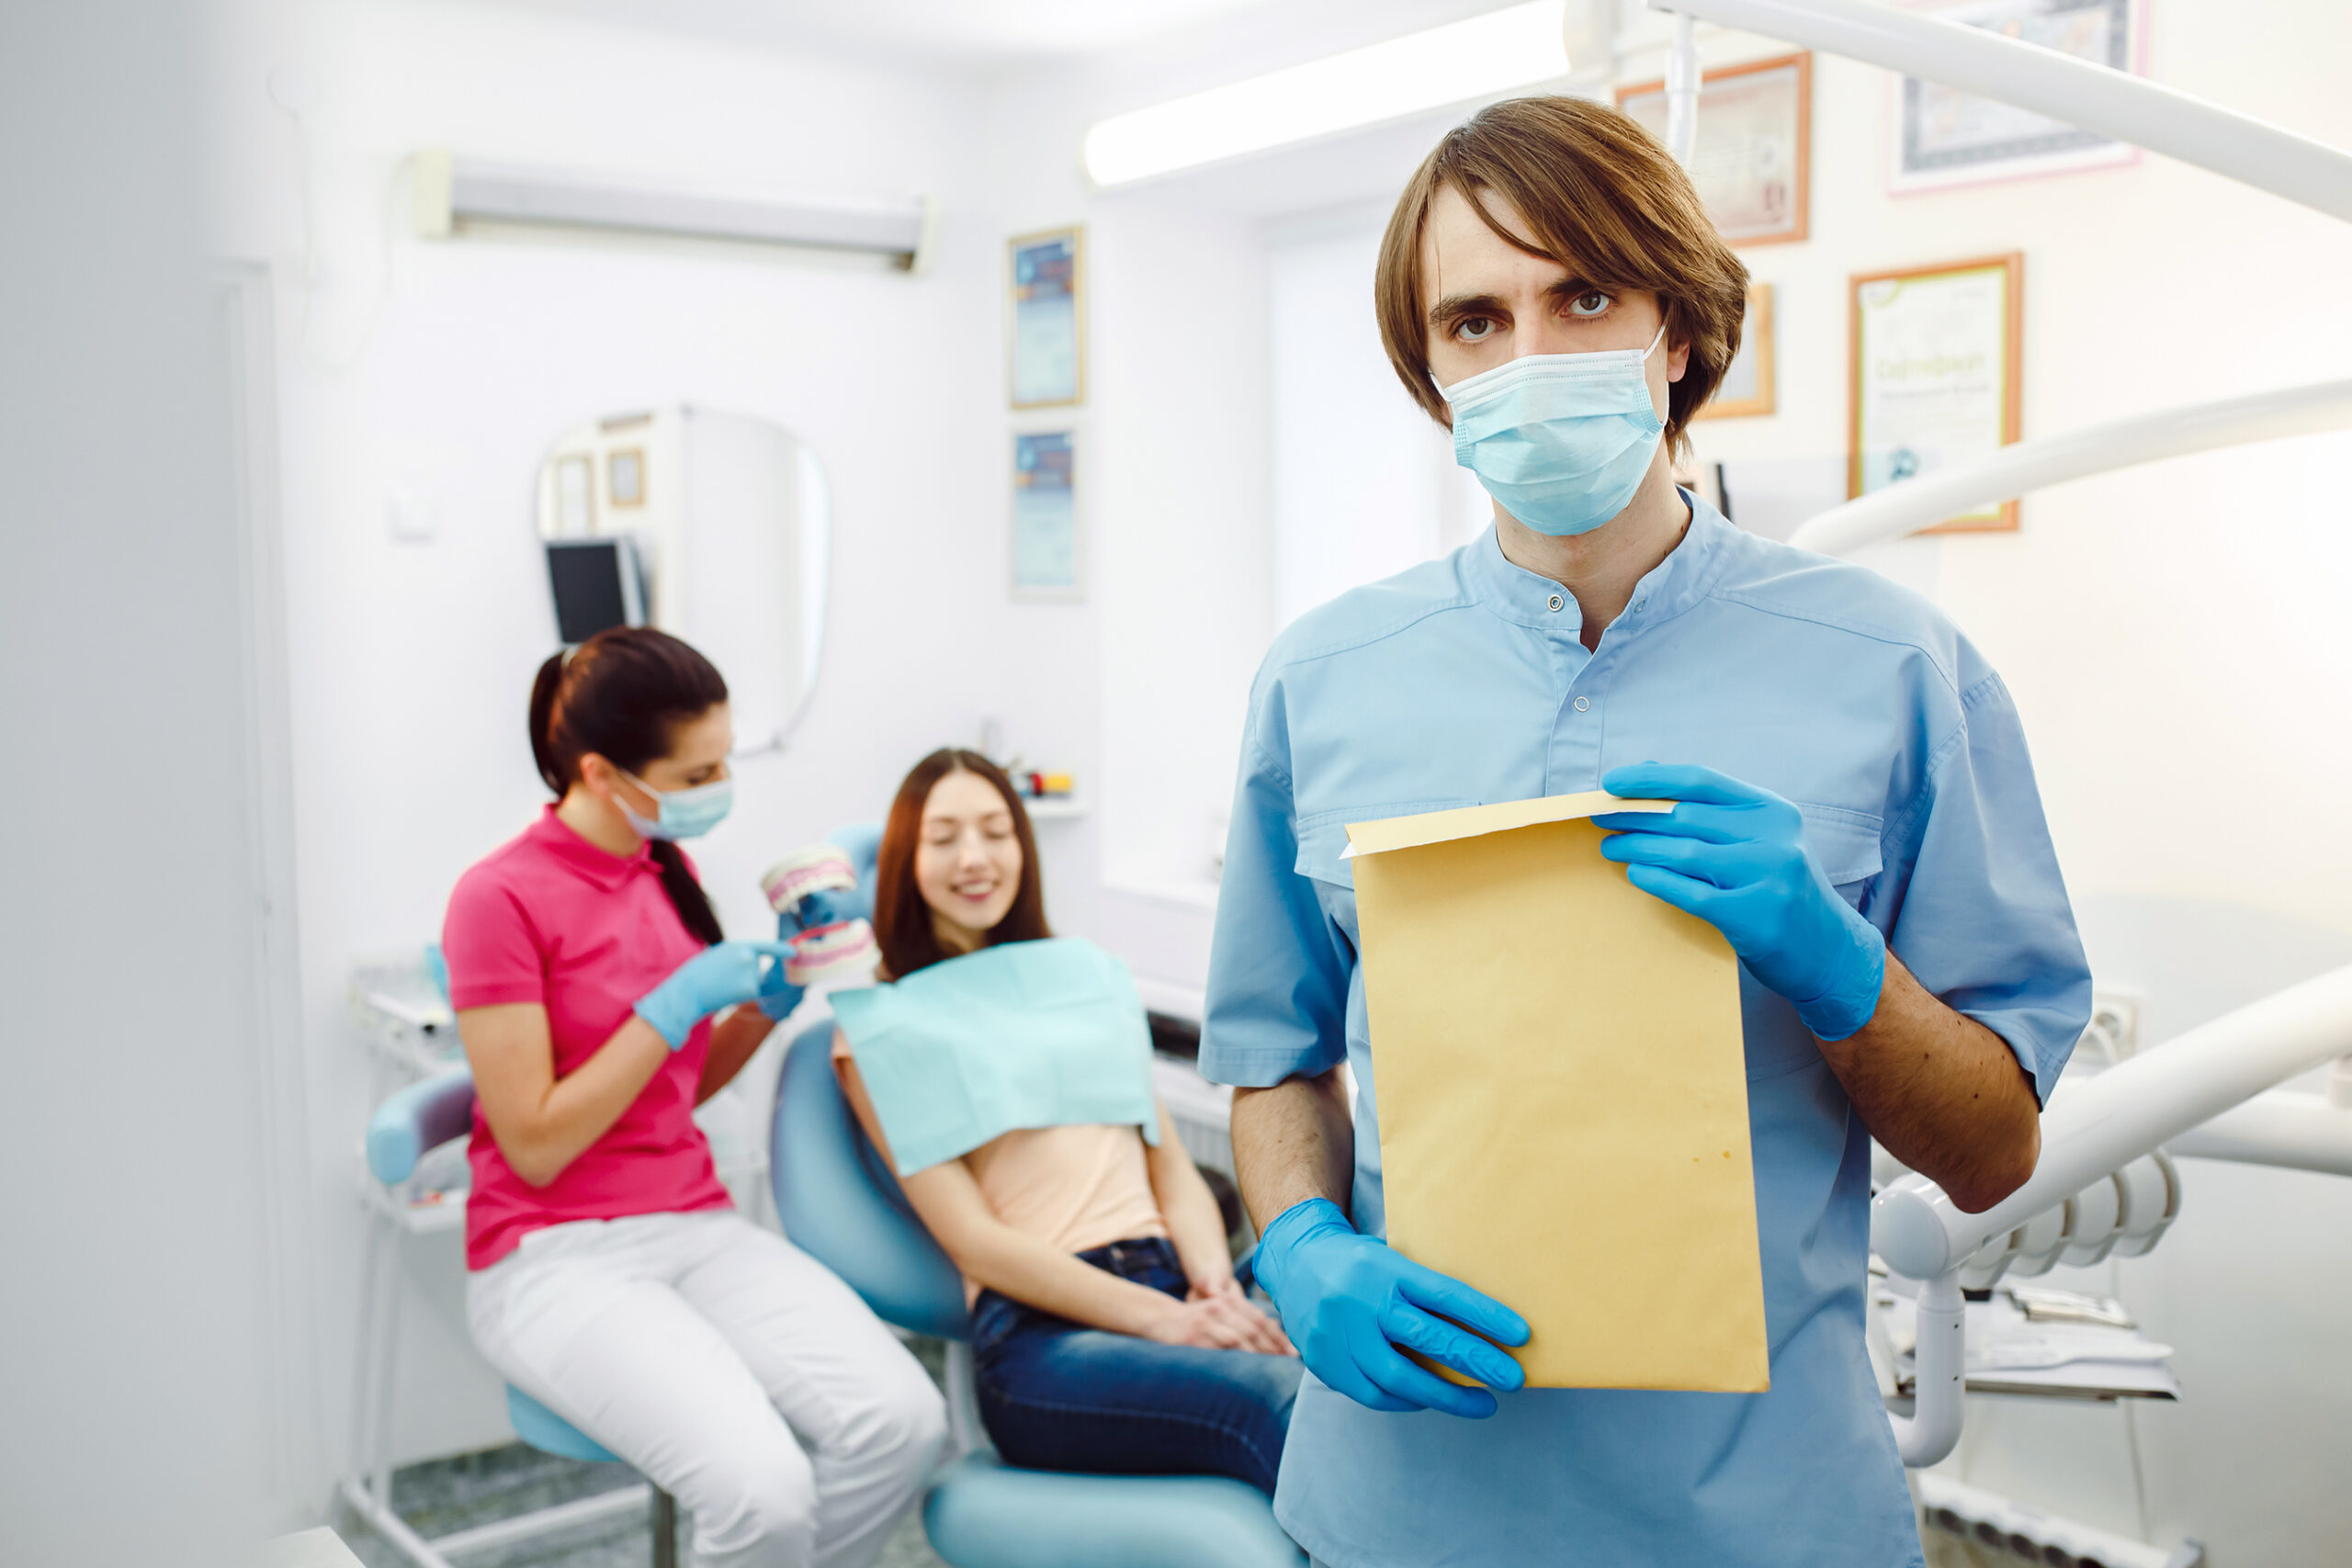 HOW CAN I GET EMERGENCY DENTIST APPOINTMENT IN A DENTAL CENTER IN TURKEY?